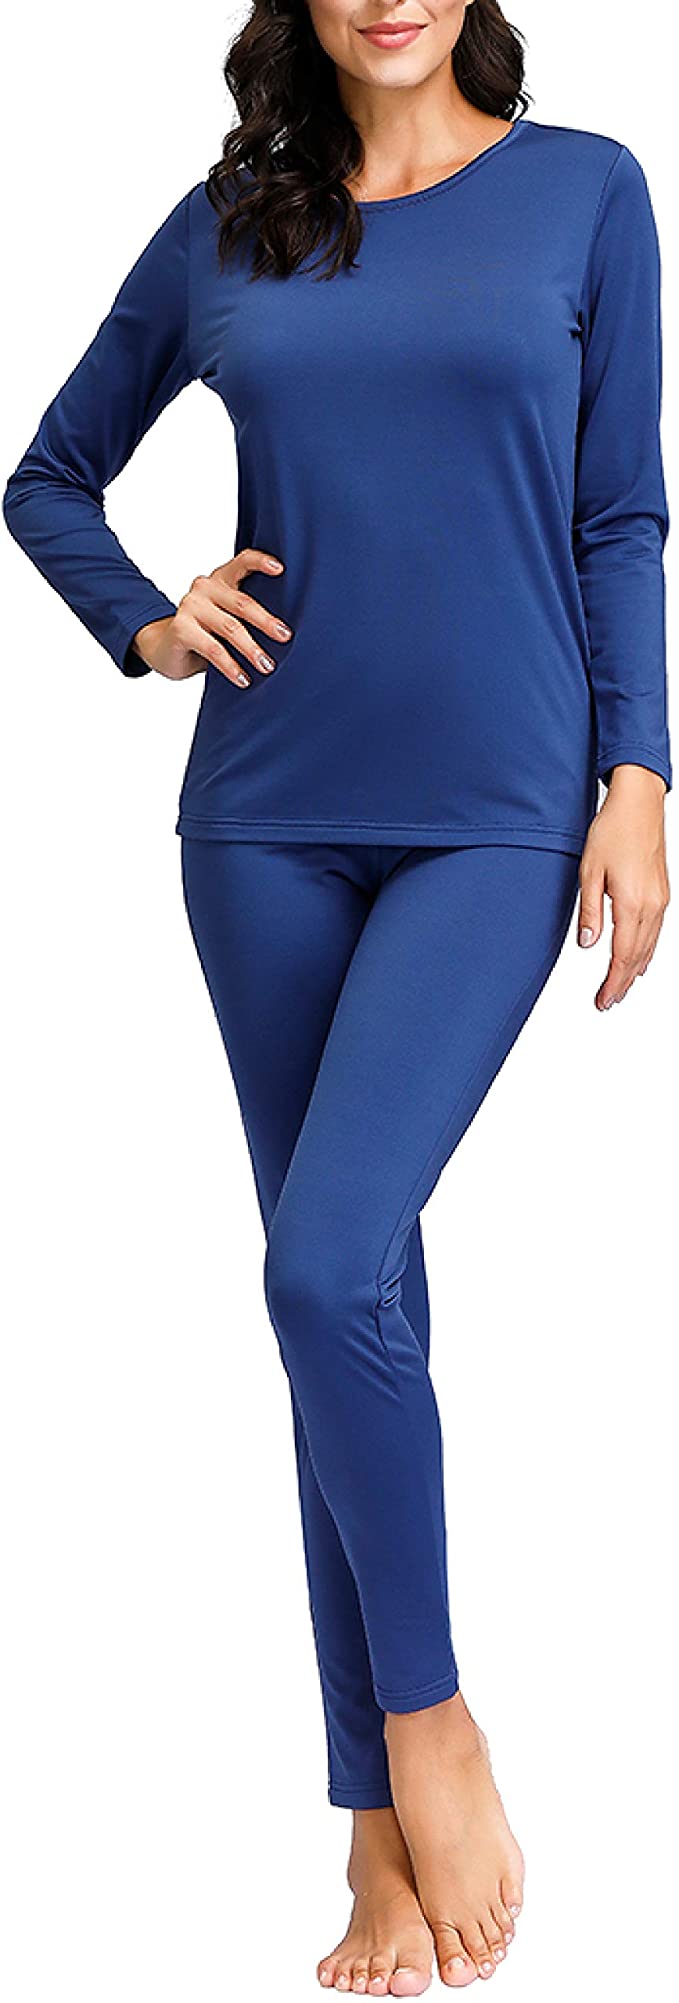 Degrees of Comfort Thermal Underwear for Women | Fleece Lined Long Johns Womens Base Layer Set